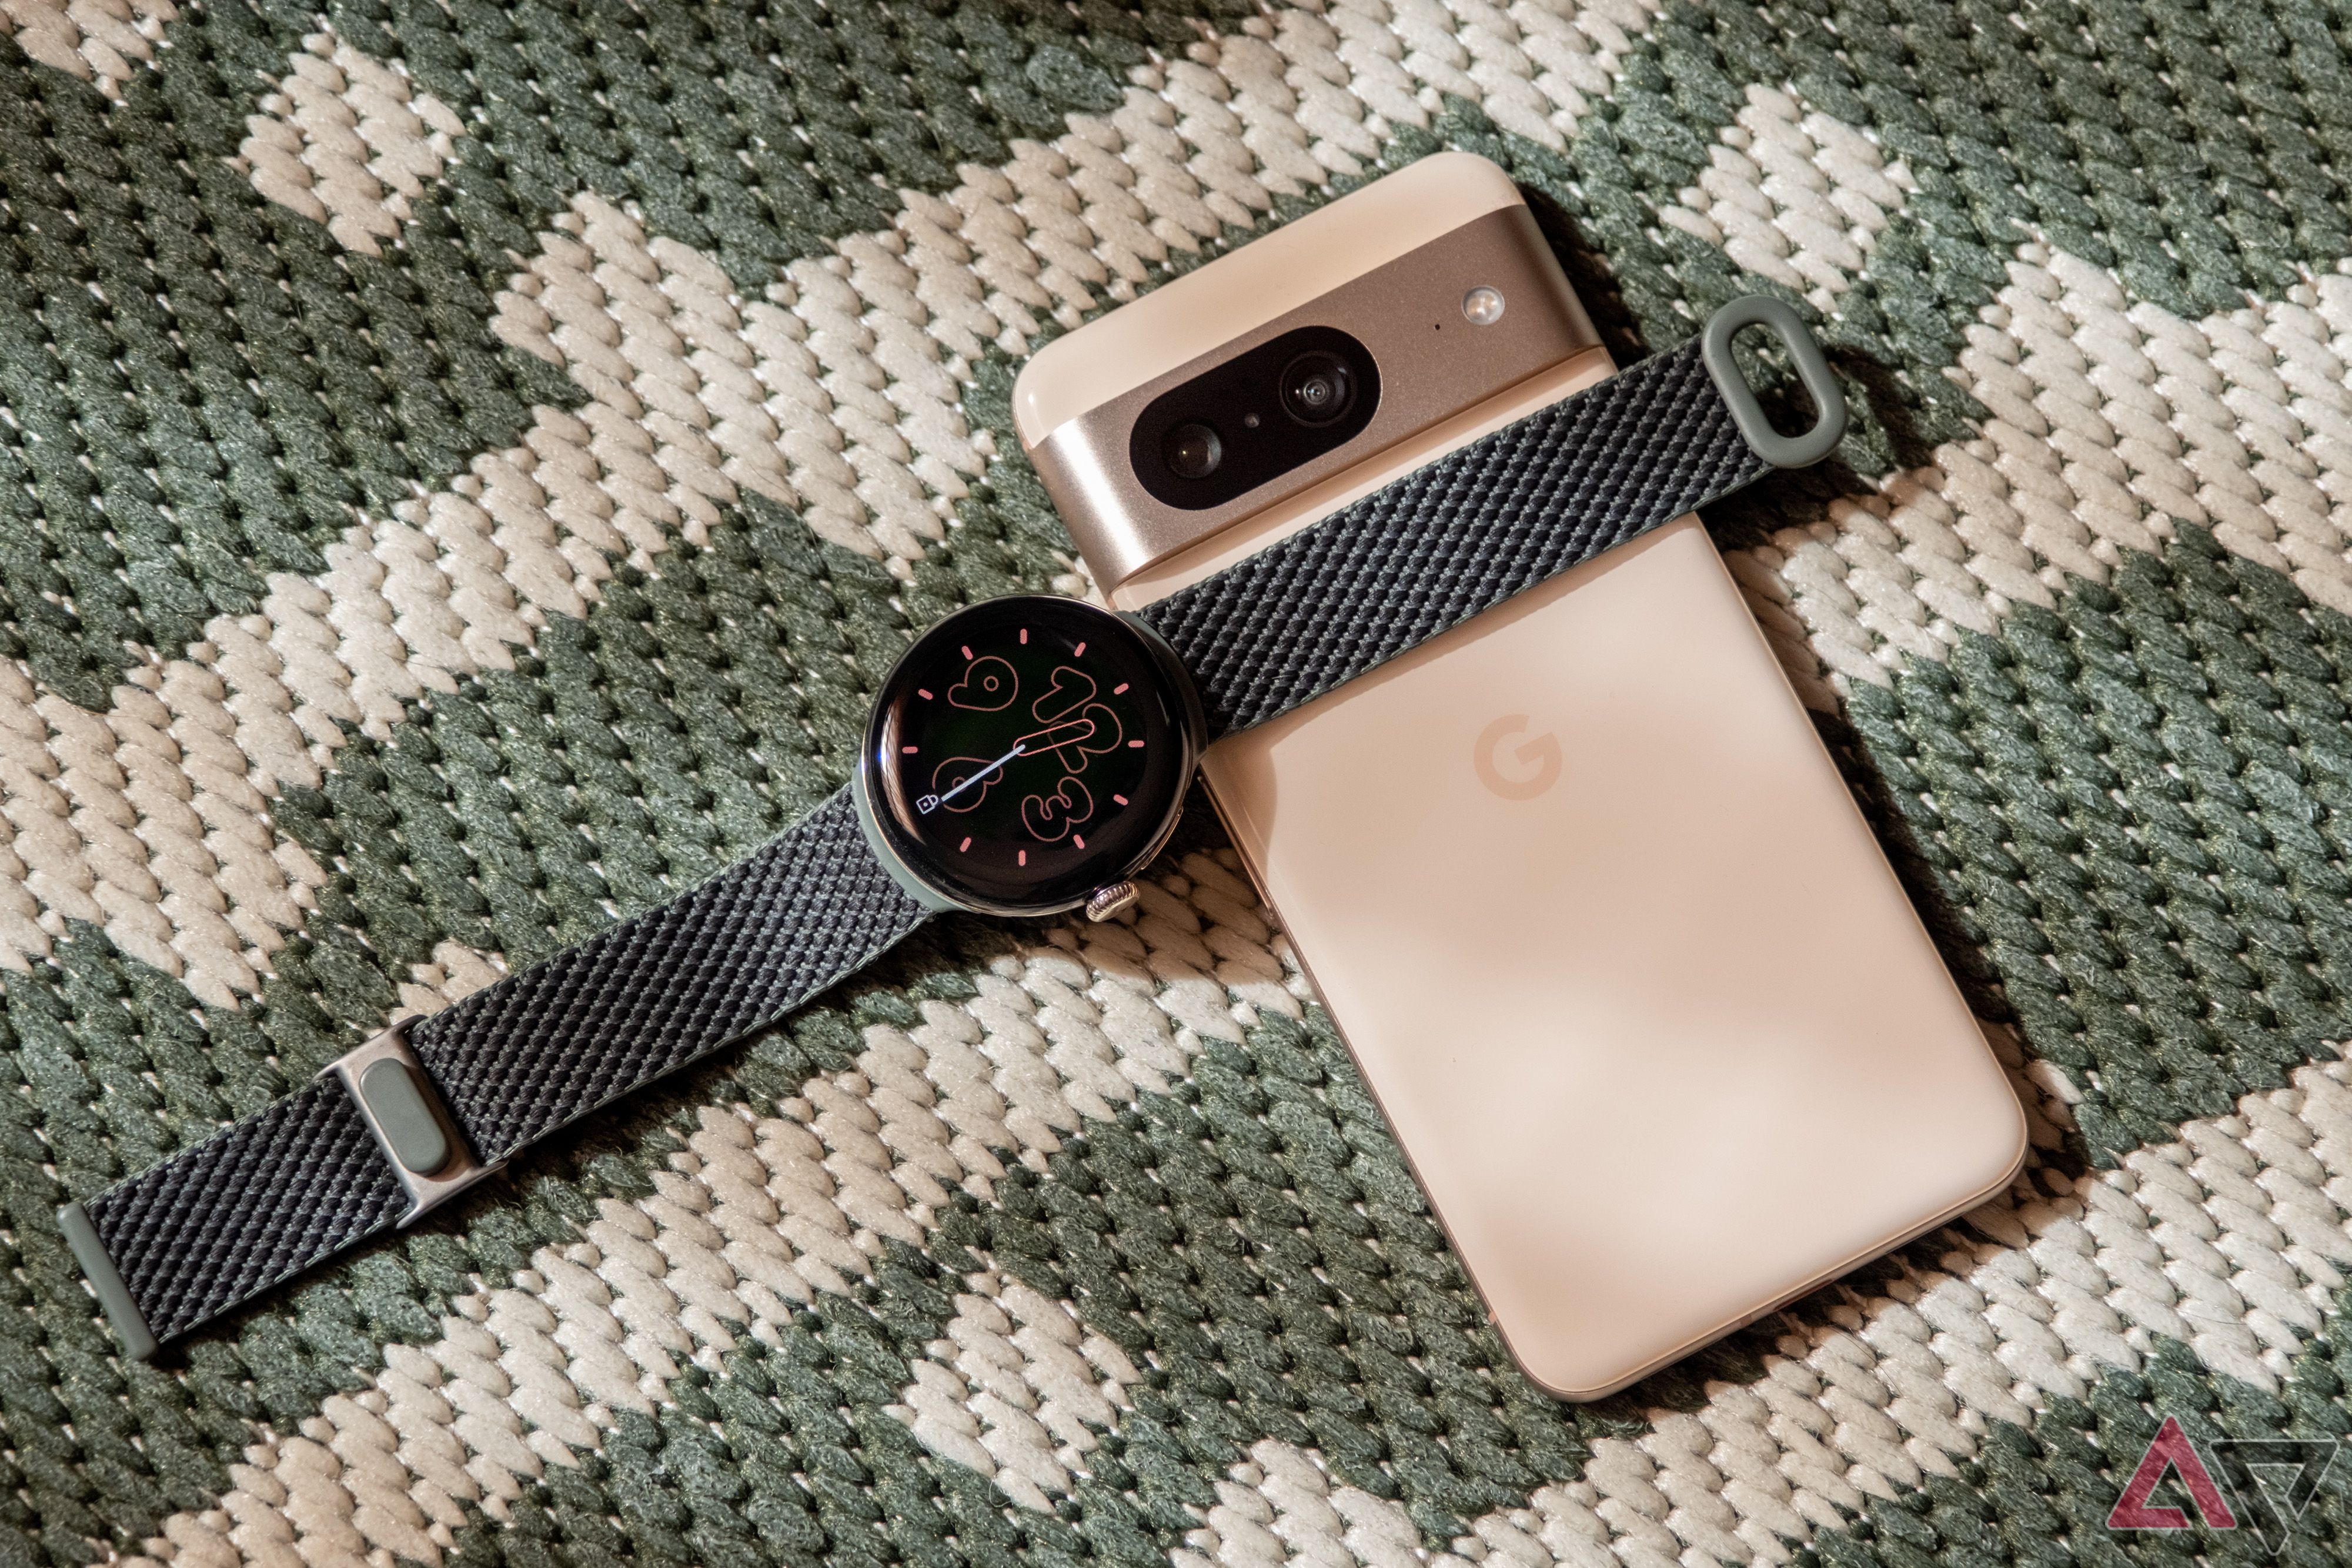 Sell Your Google Pixel Watch 2 Online